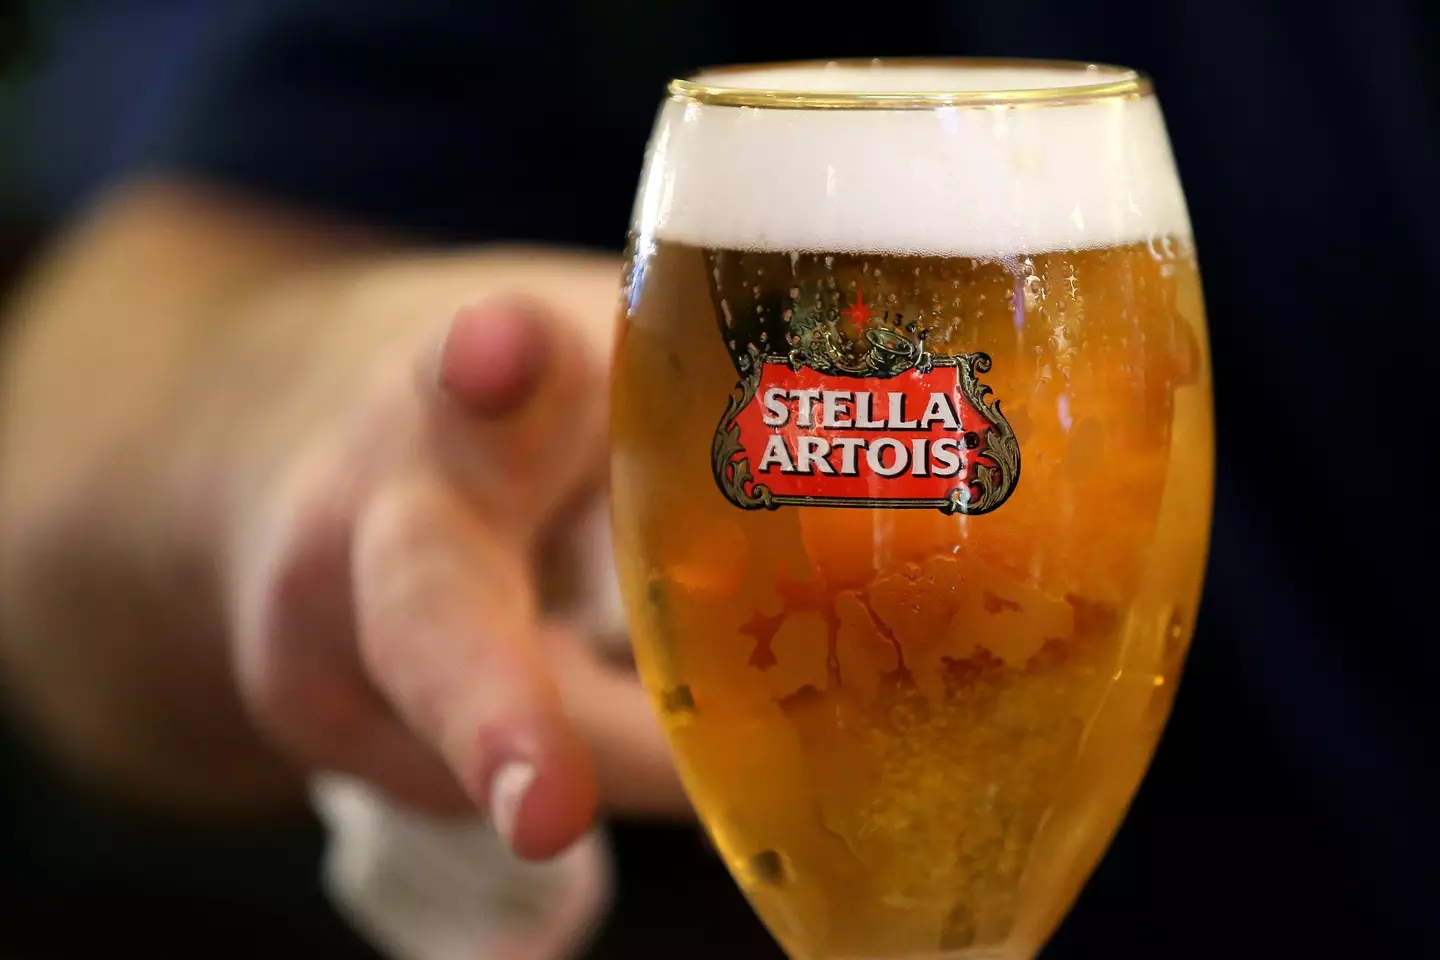 Pints are typically cheap at Spoons, but why is that?